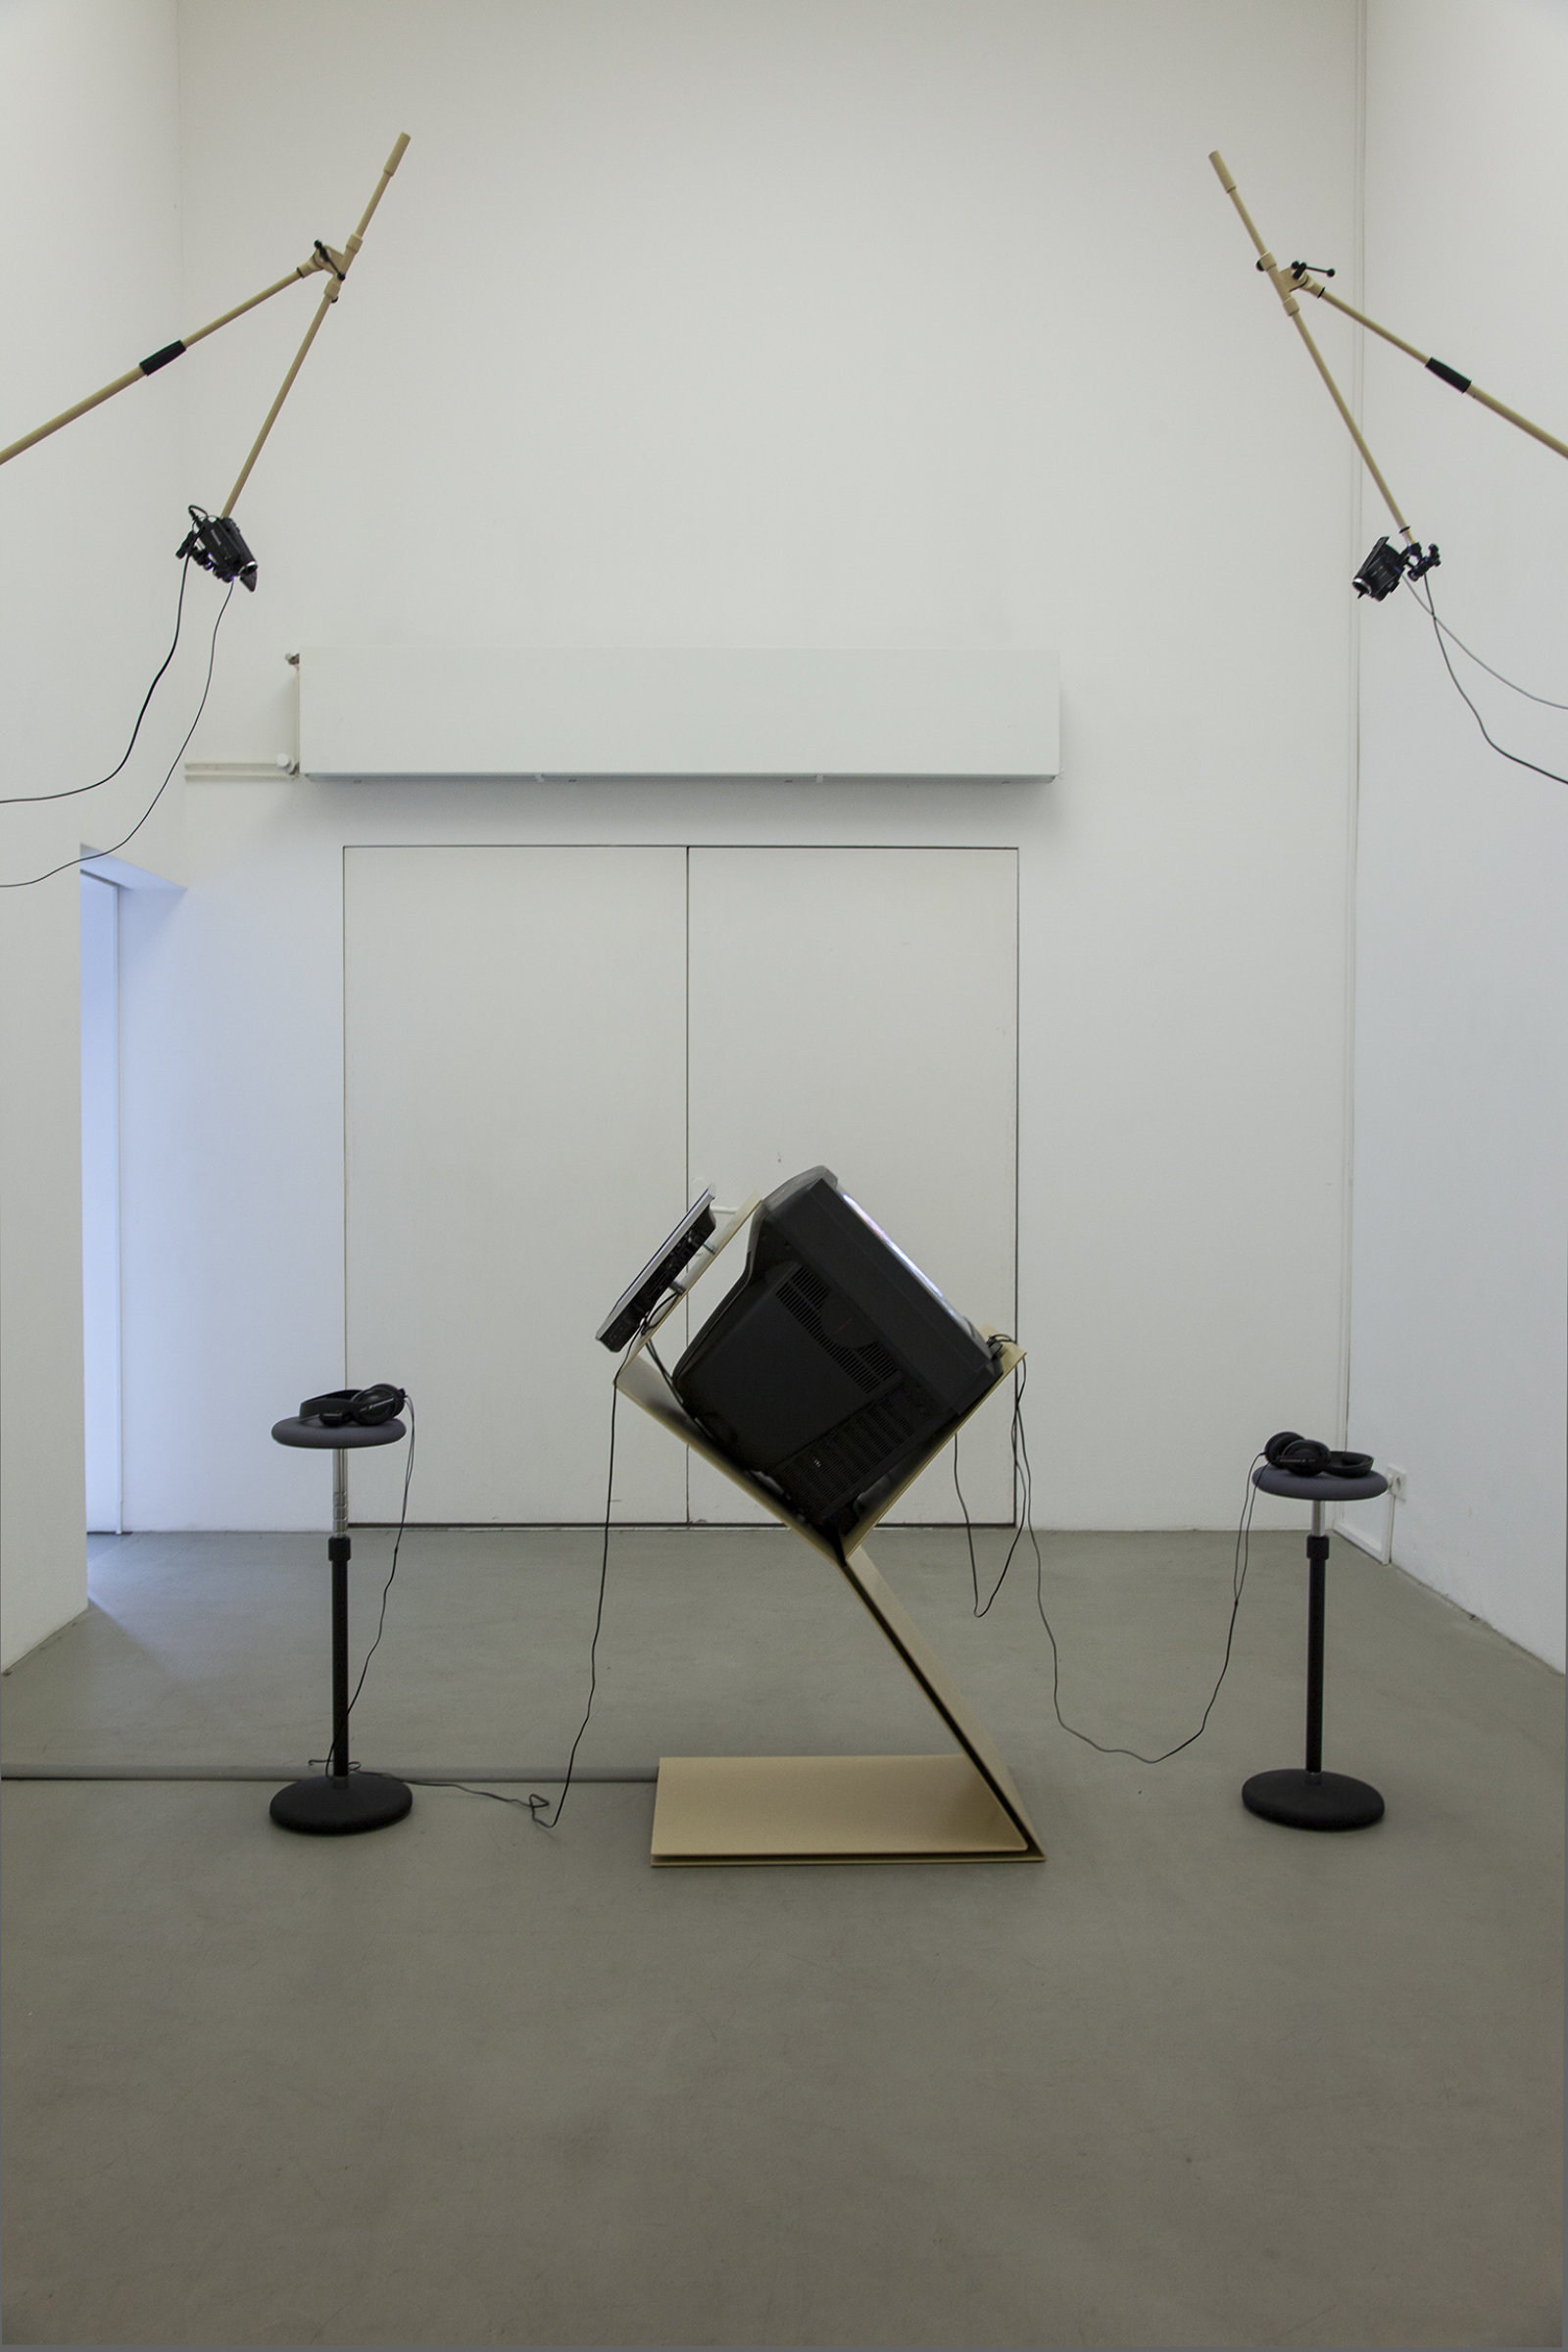 Judy Radul, A CONTAINER CONTAINING NOT ONE TV, 2013, powder coated steel, CRT television, 2 flatscreen televisions, local television signal, remote control, two live video cameras, maxmsp patch, dimensions variable. Installation view, This	is	Television,	Daadgalerie,	Berlin,	Germany, 2013